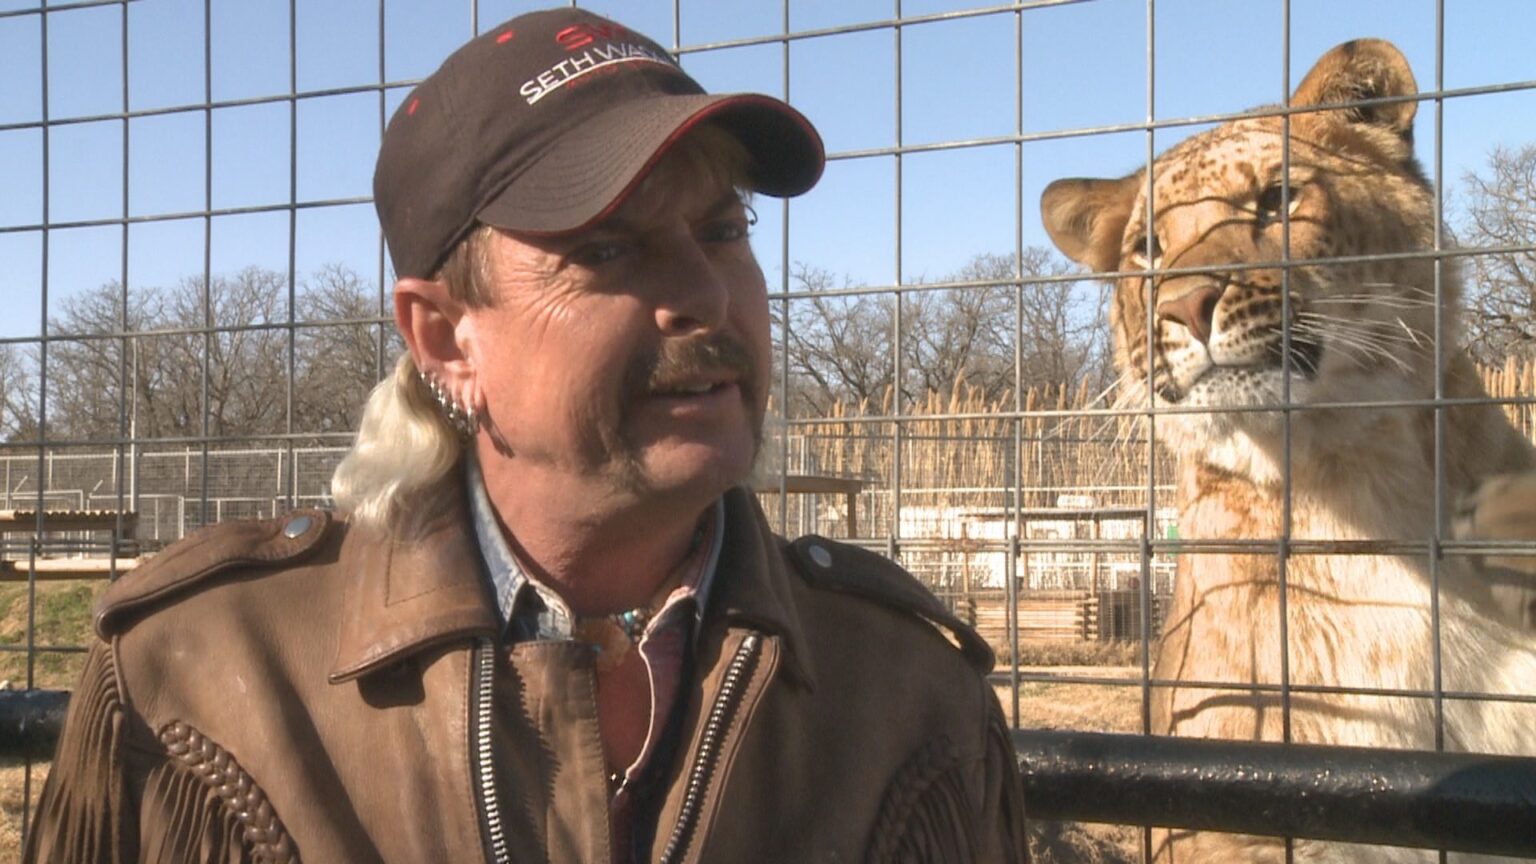 One of the consequences regarding Tiger King was the closure of Joe Exotic’s zoo. How much damage was done on Exotic's old zoo?